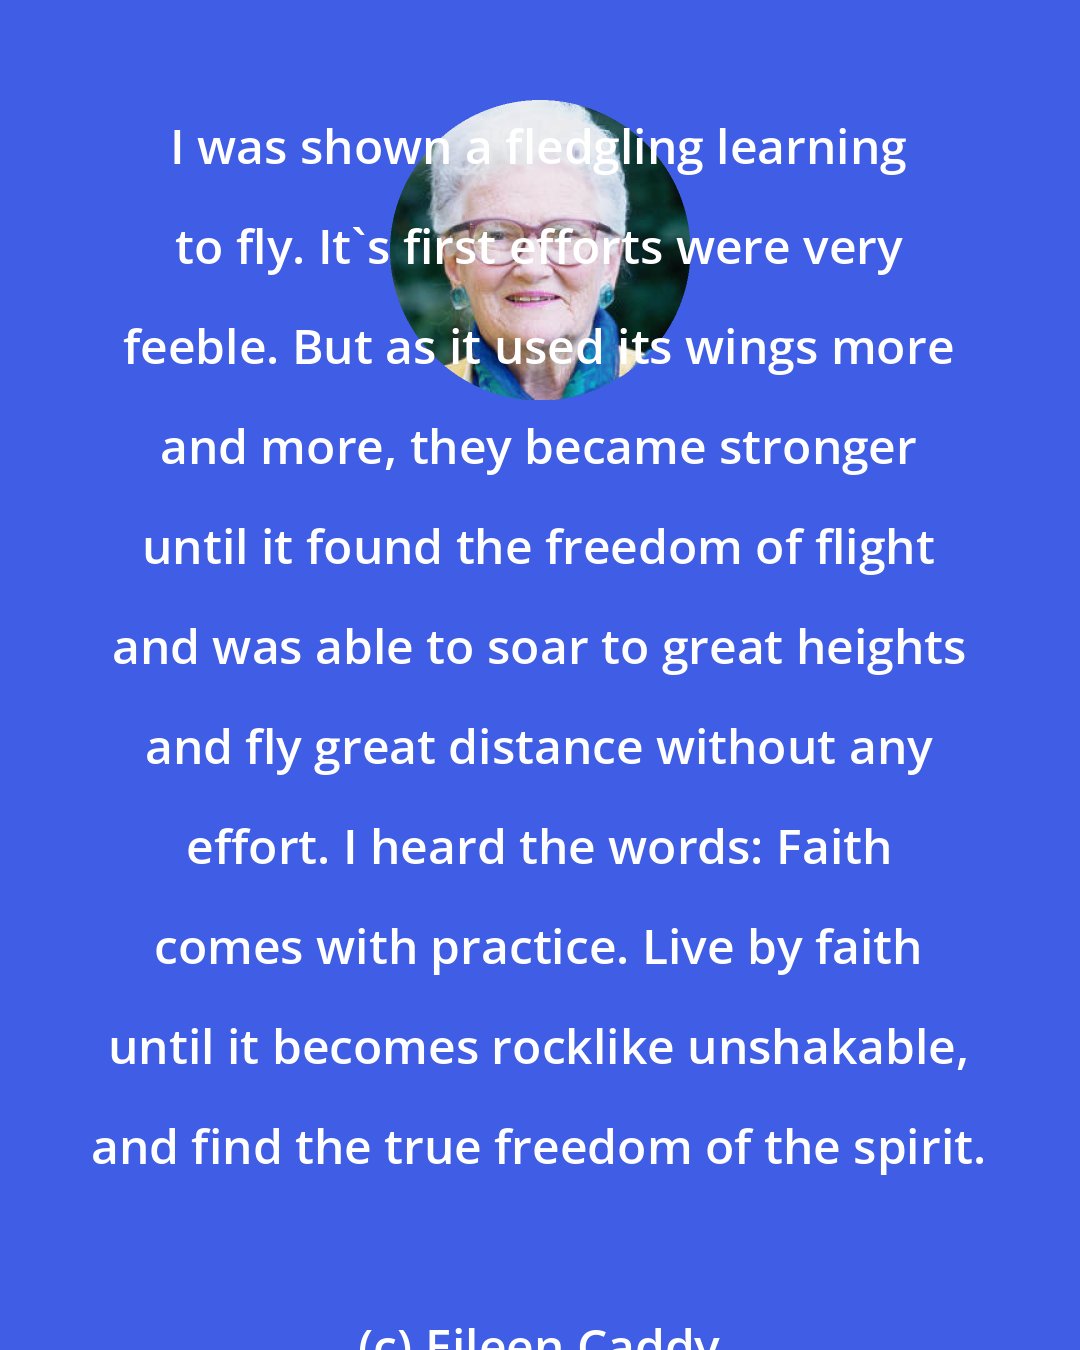 Eileen Caddy: I was shown a fledgling learning to fly. It's first efforts were very feeble. But as it used its wings more and more, they became stronger until it found the freedom of flight and was able to soar to great heights and fly great distance without any effort. I heard the words: Faith comes with practice. Live by faith until it becomes rocklike unshakable, and find the true freedom of the spirit.